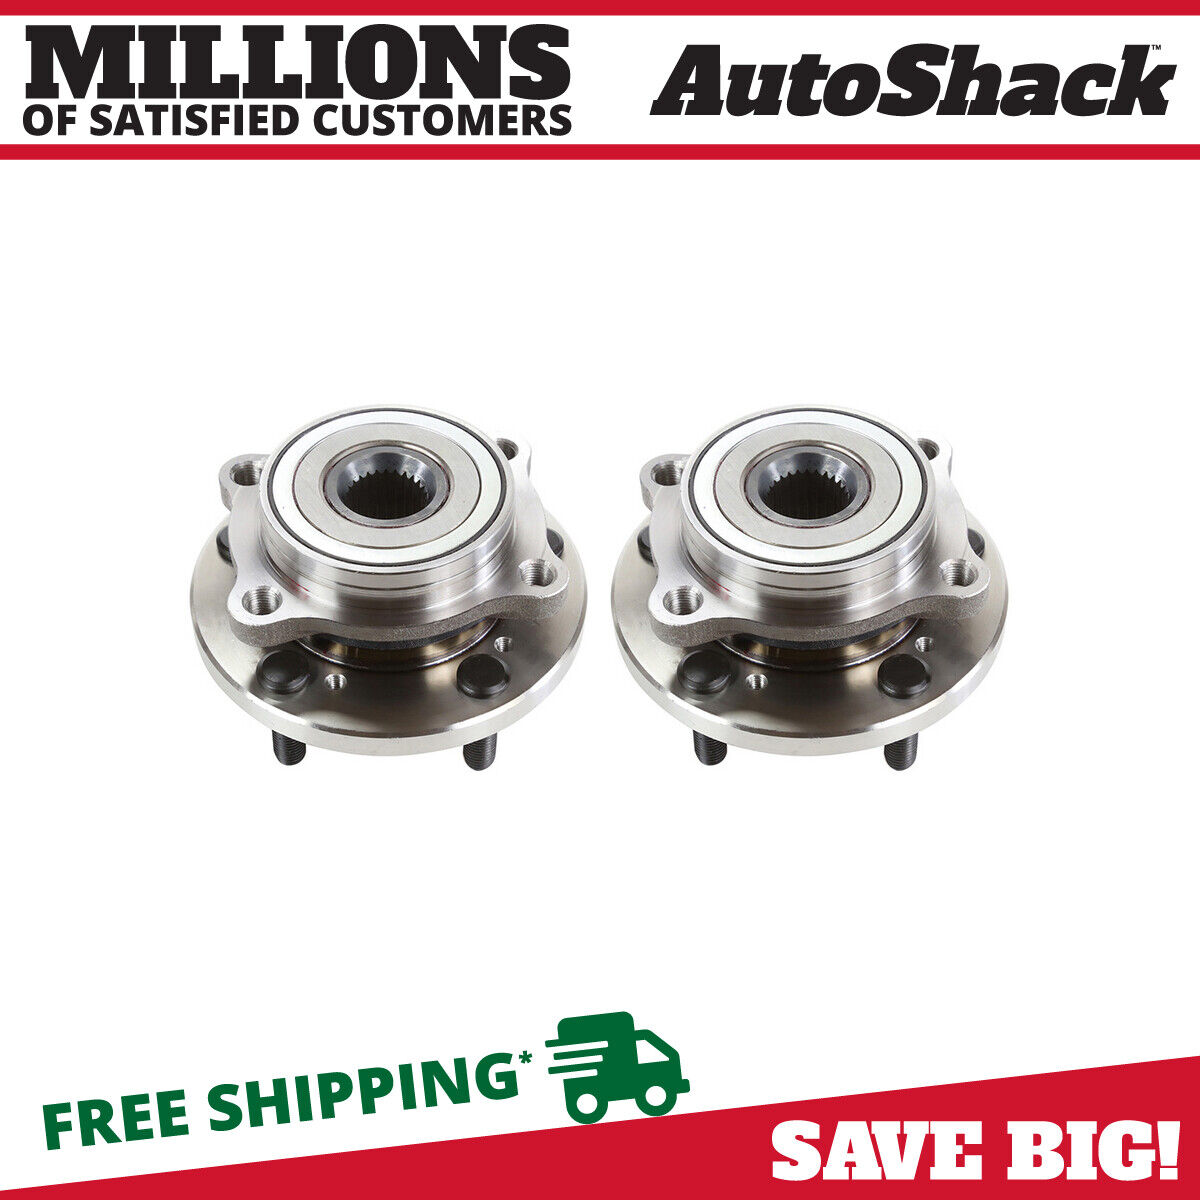 Front Wheel Hub Bearings Pair 2 for Mitsubishi Galant Endeavor 2006-2012 Eclipse